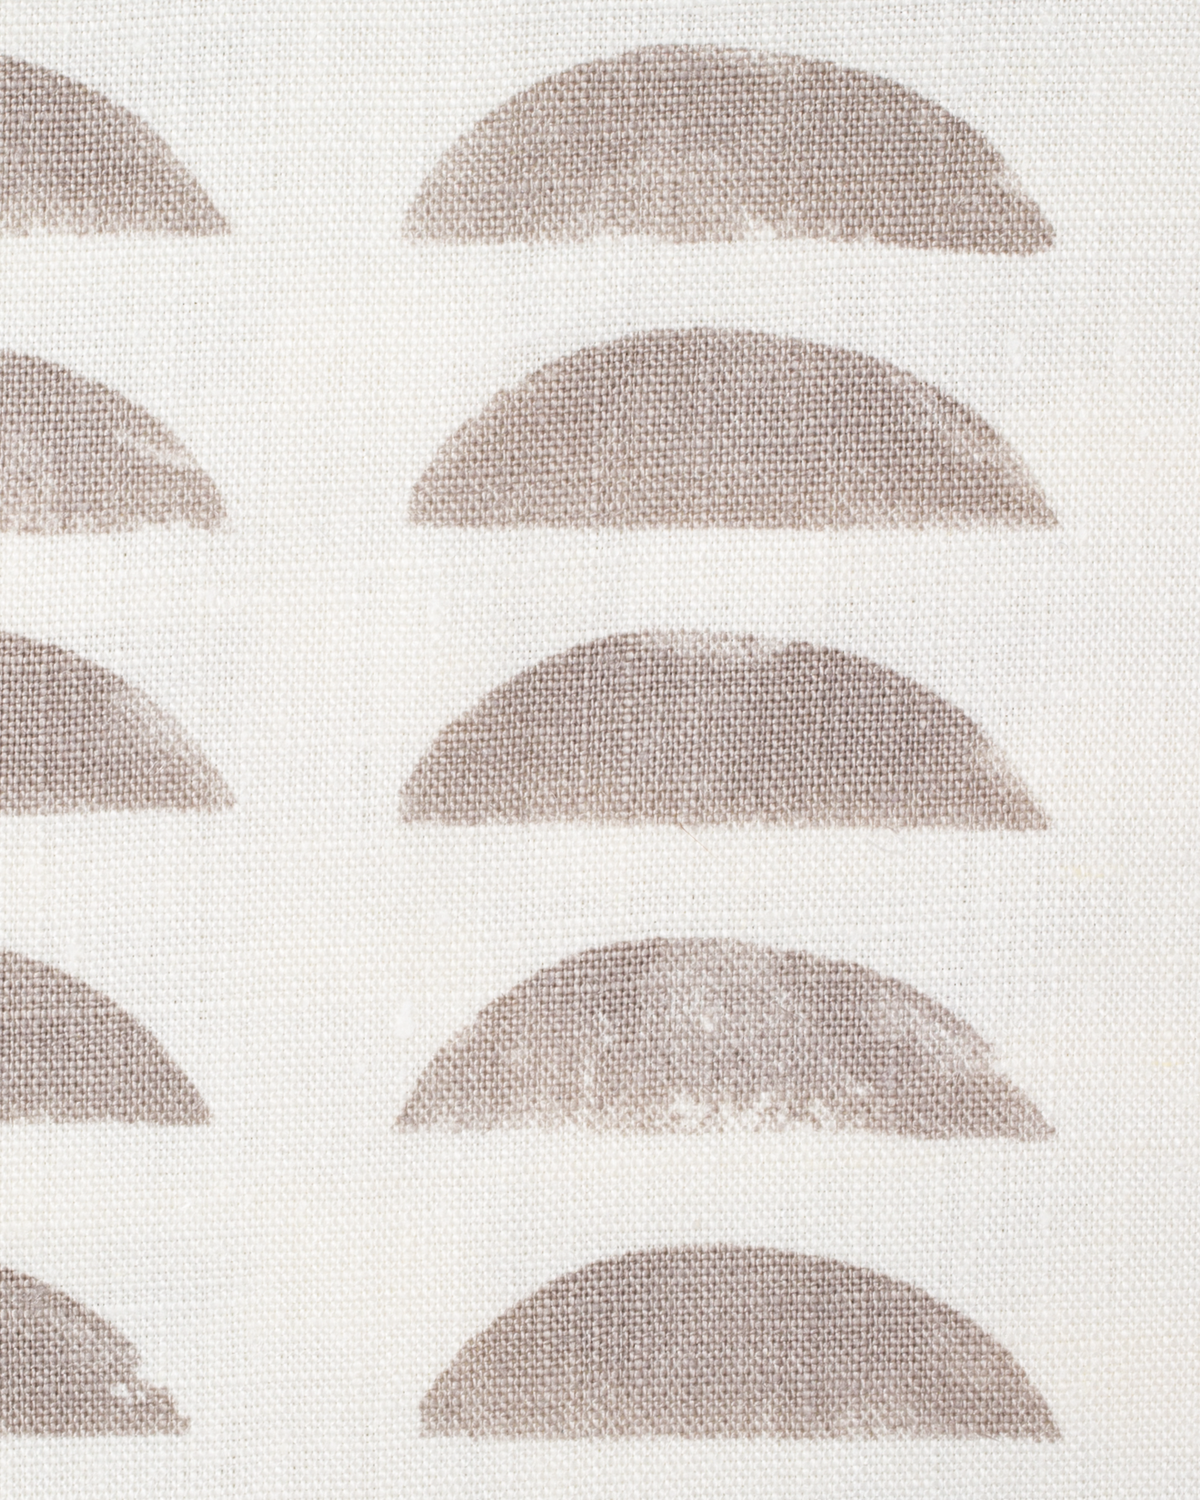 Hills Fabric in Gray-Wood